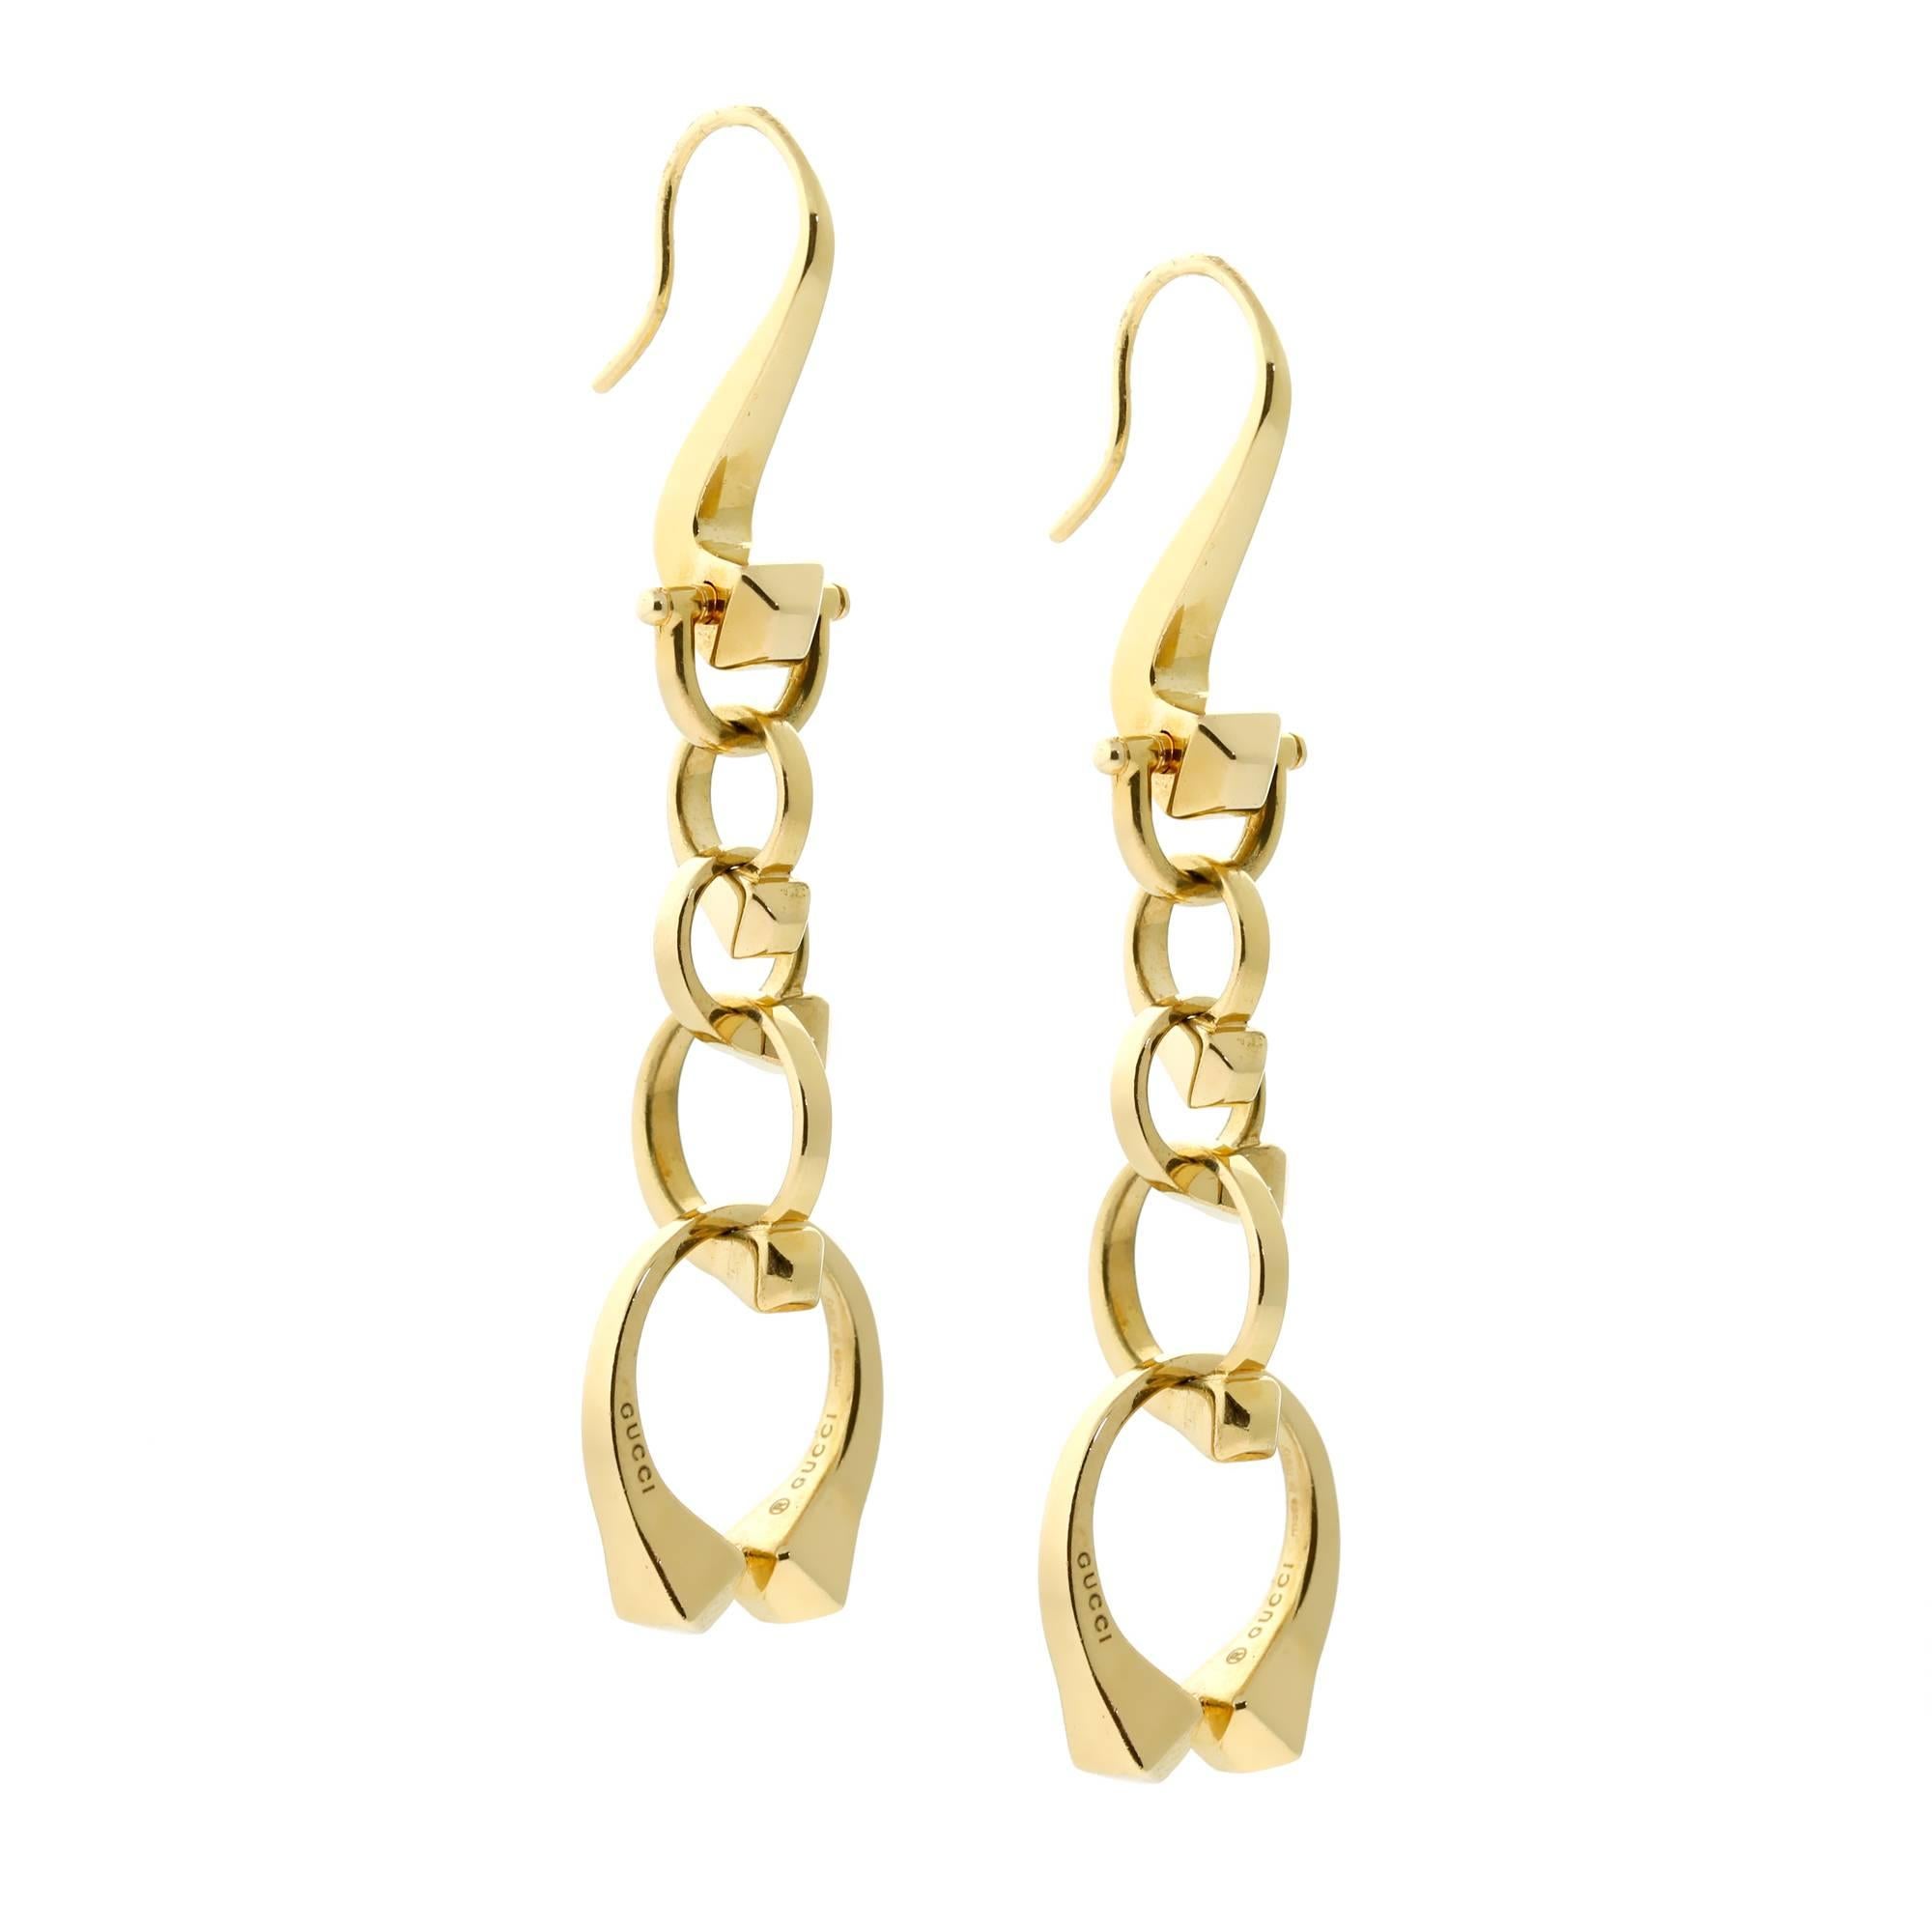 A chic pair of Gucci earrings featuring articulating Nail motifs crafted in 18k yellow gold. Earring Length: 1.25